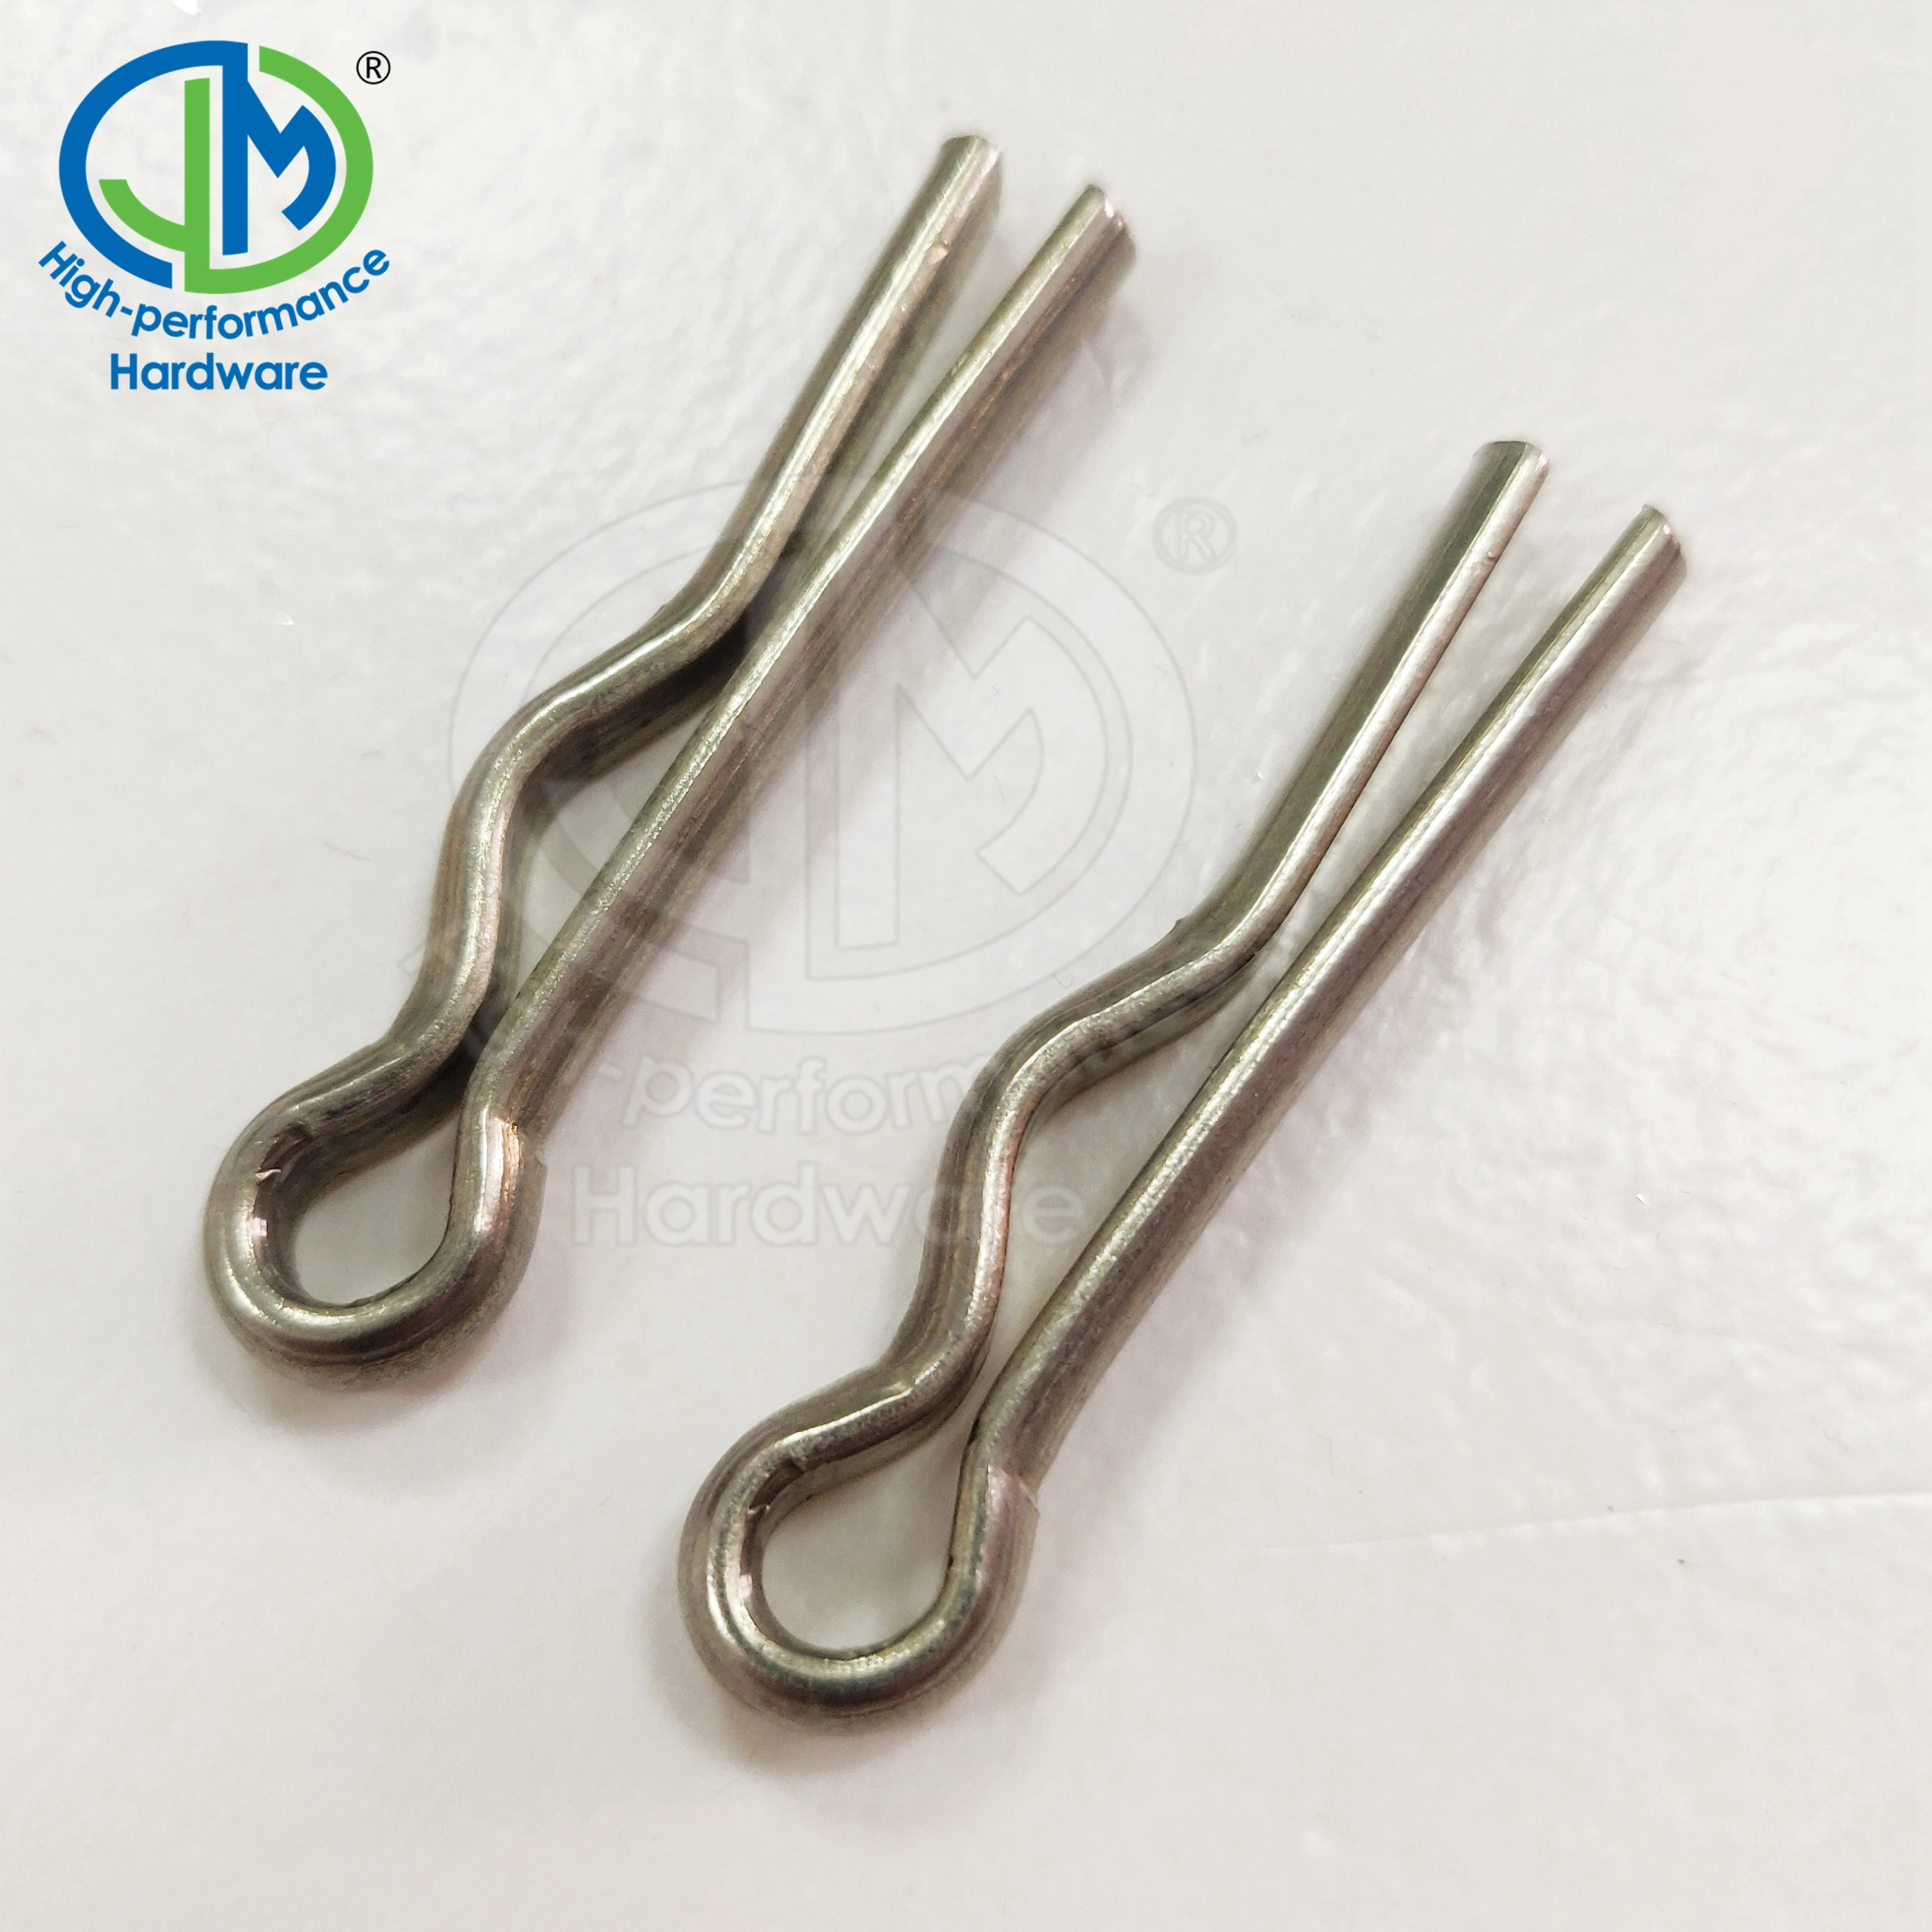 Trickle media reputation R Type Cotter Pin Used To Lock Clevis Pins And Slotted Nuts - Buy R Pin,R  Type Cotter Pin,R Pin Machine Product on Alibaba.com